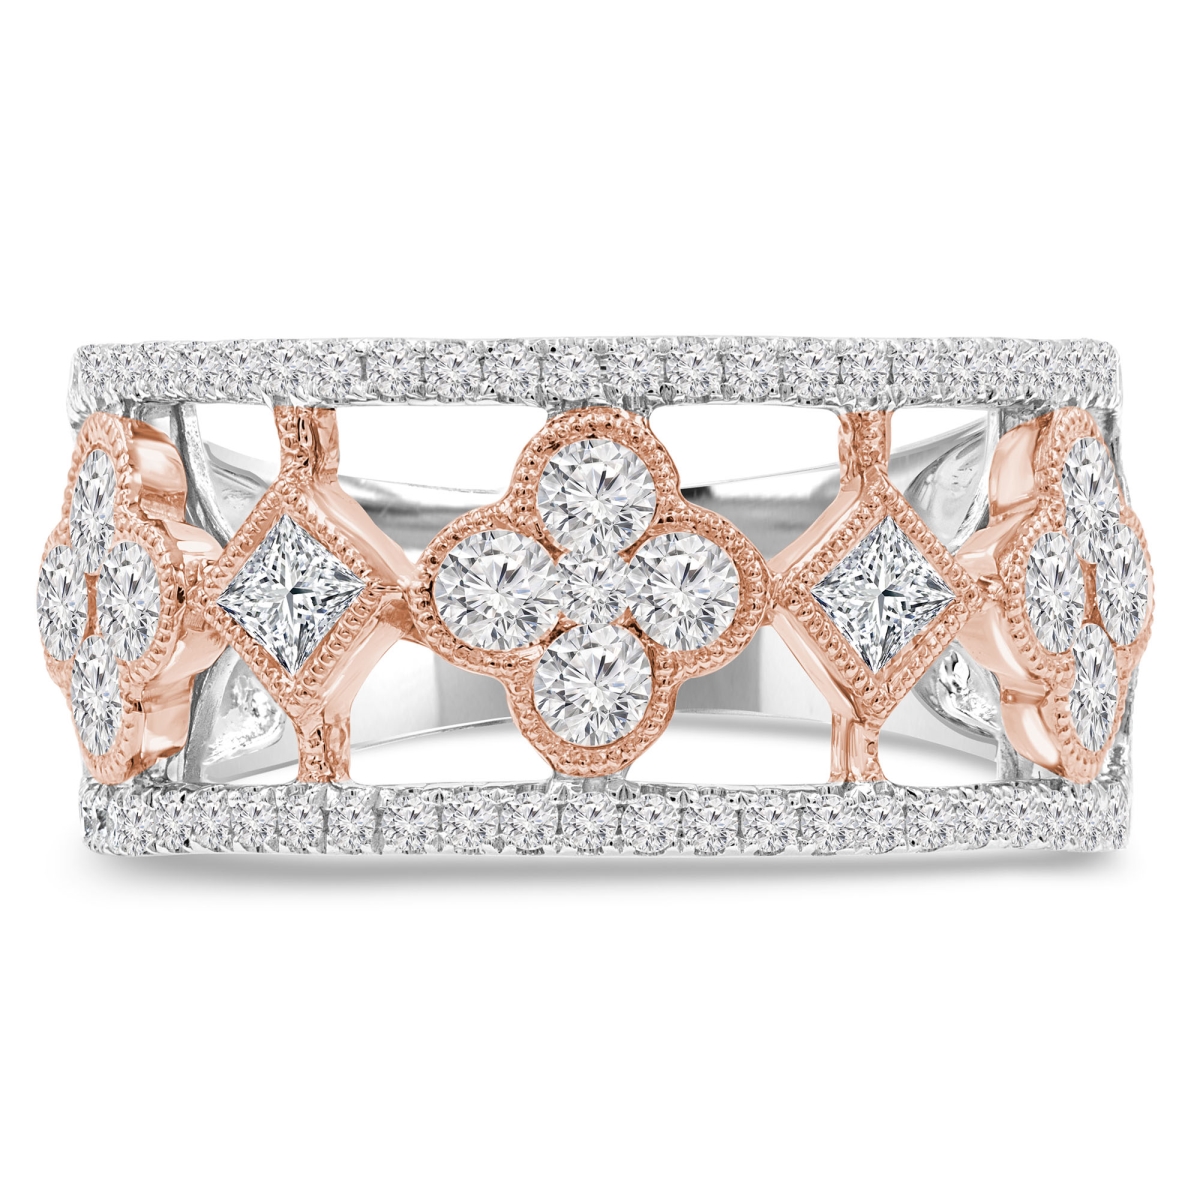 Picture of Majesty Diamonds MDR210138-6 1.13 CTW Princess Diamond Cocktail Ring in 14K Two-Tone Gold - Size 6